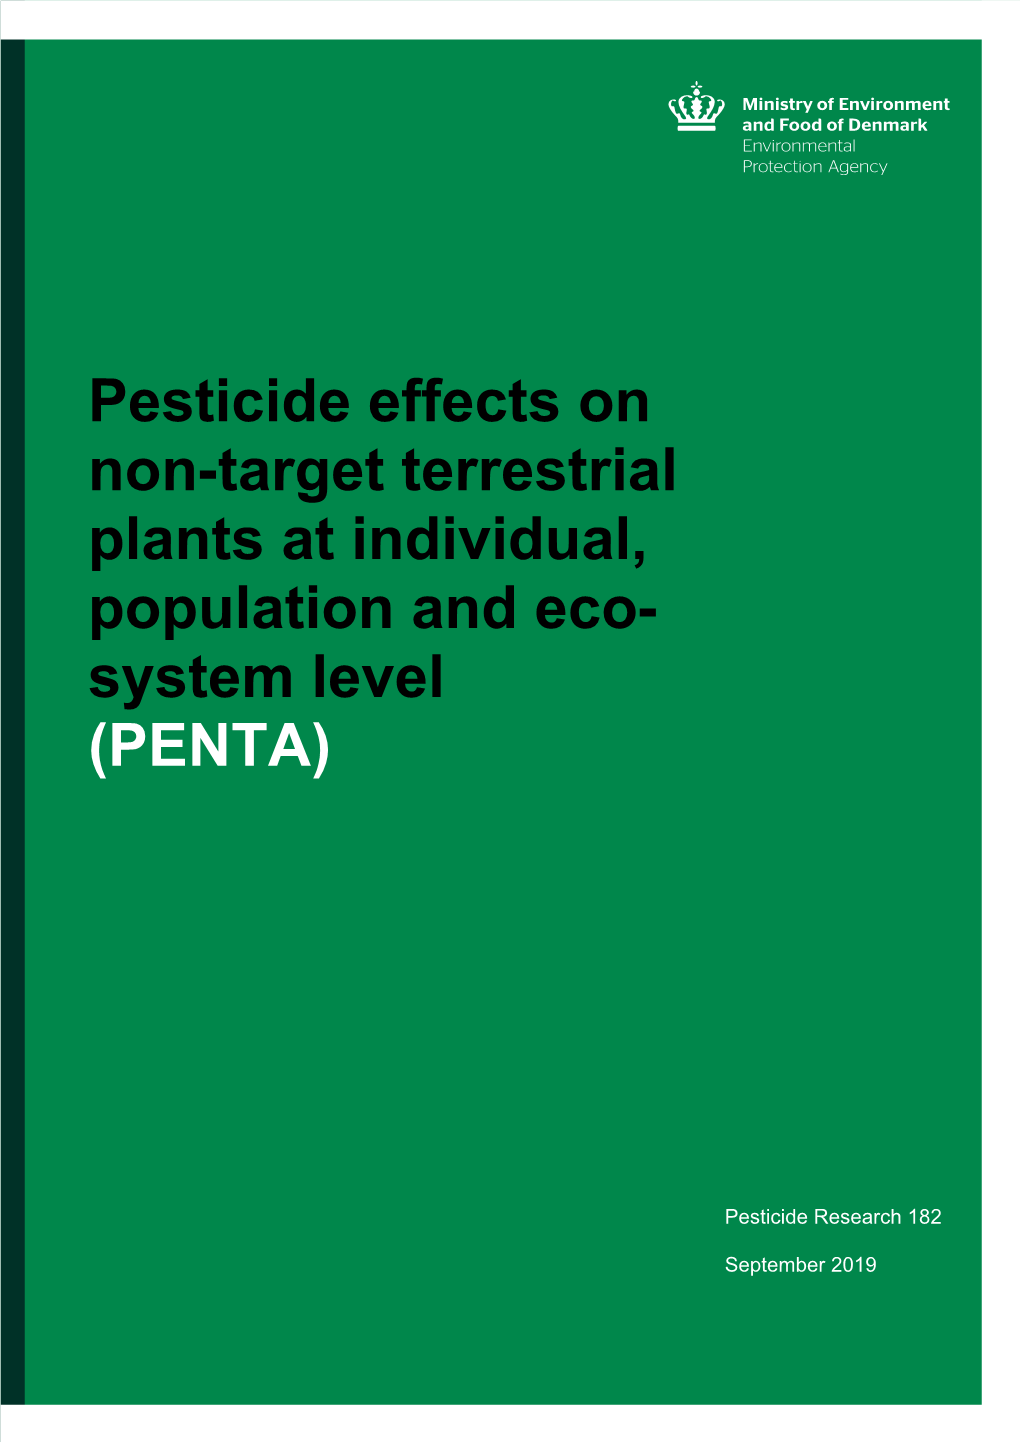 Pesticide Effects on Non-Target Terrestrial Plants at Individual, Population and Eco- System Level (PENTA)